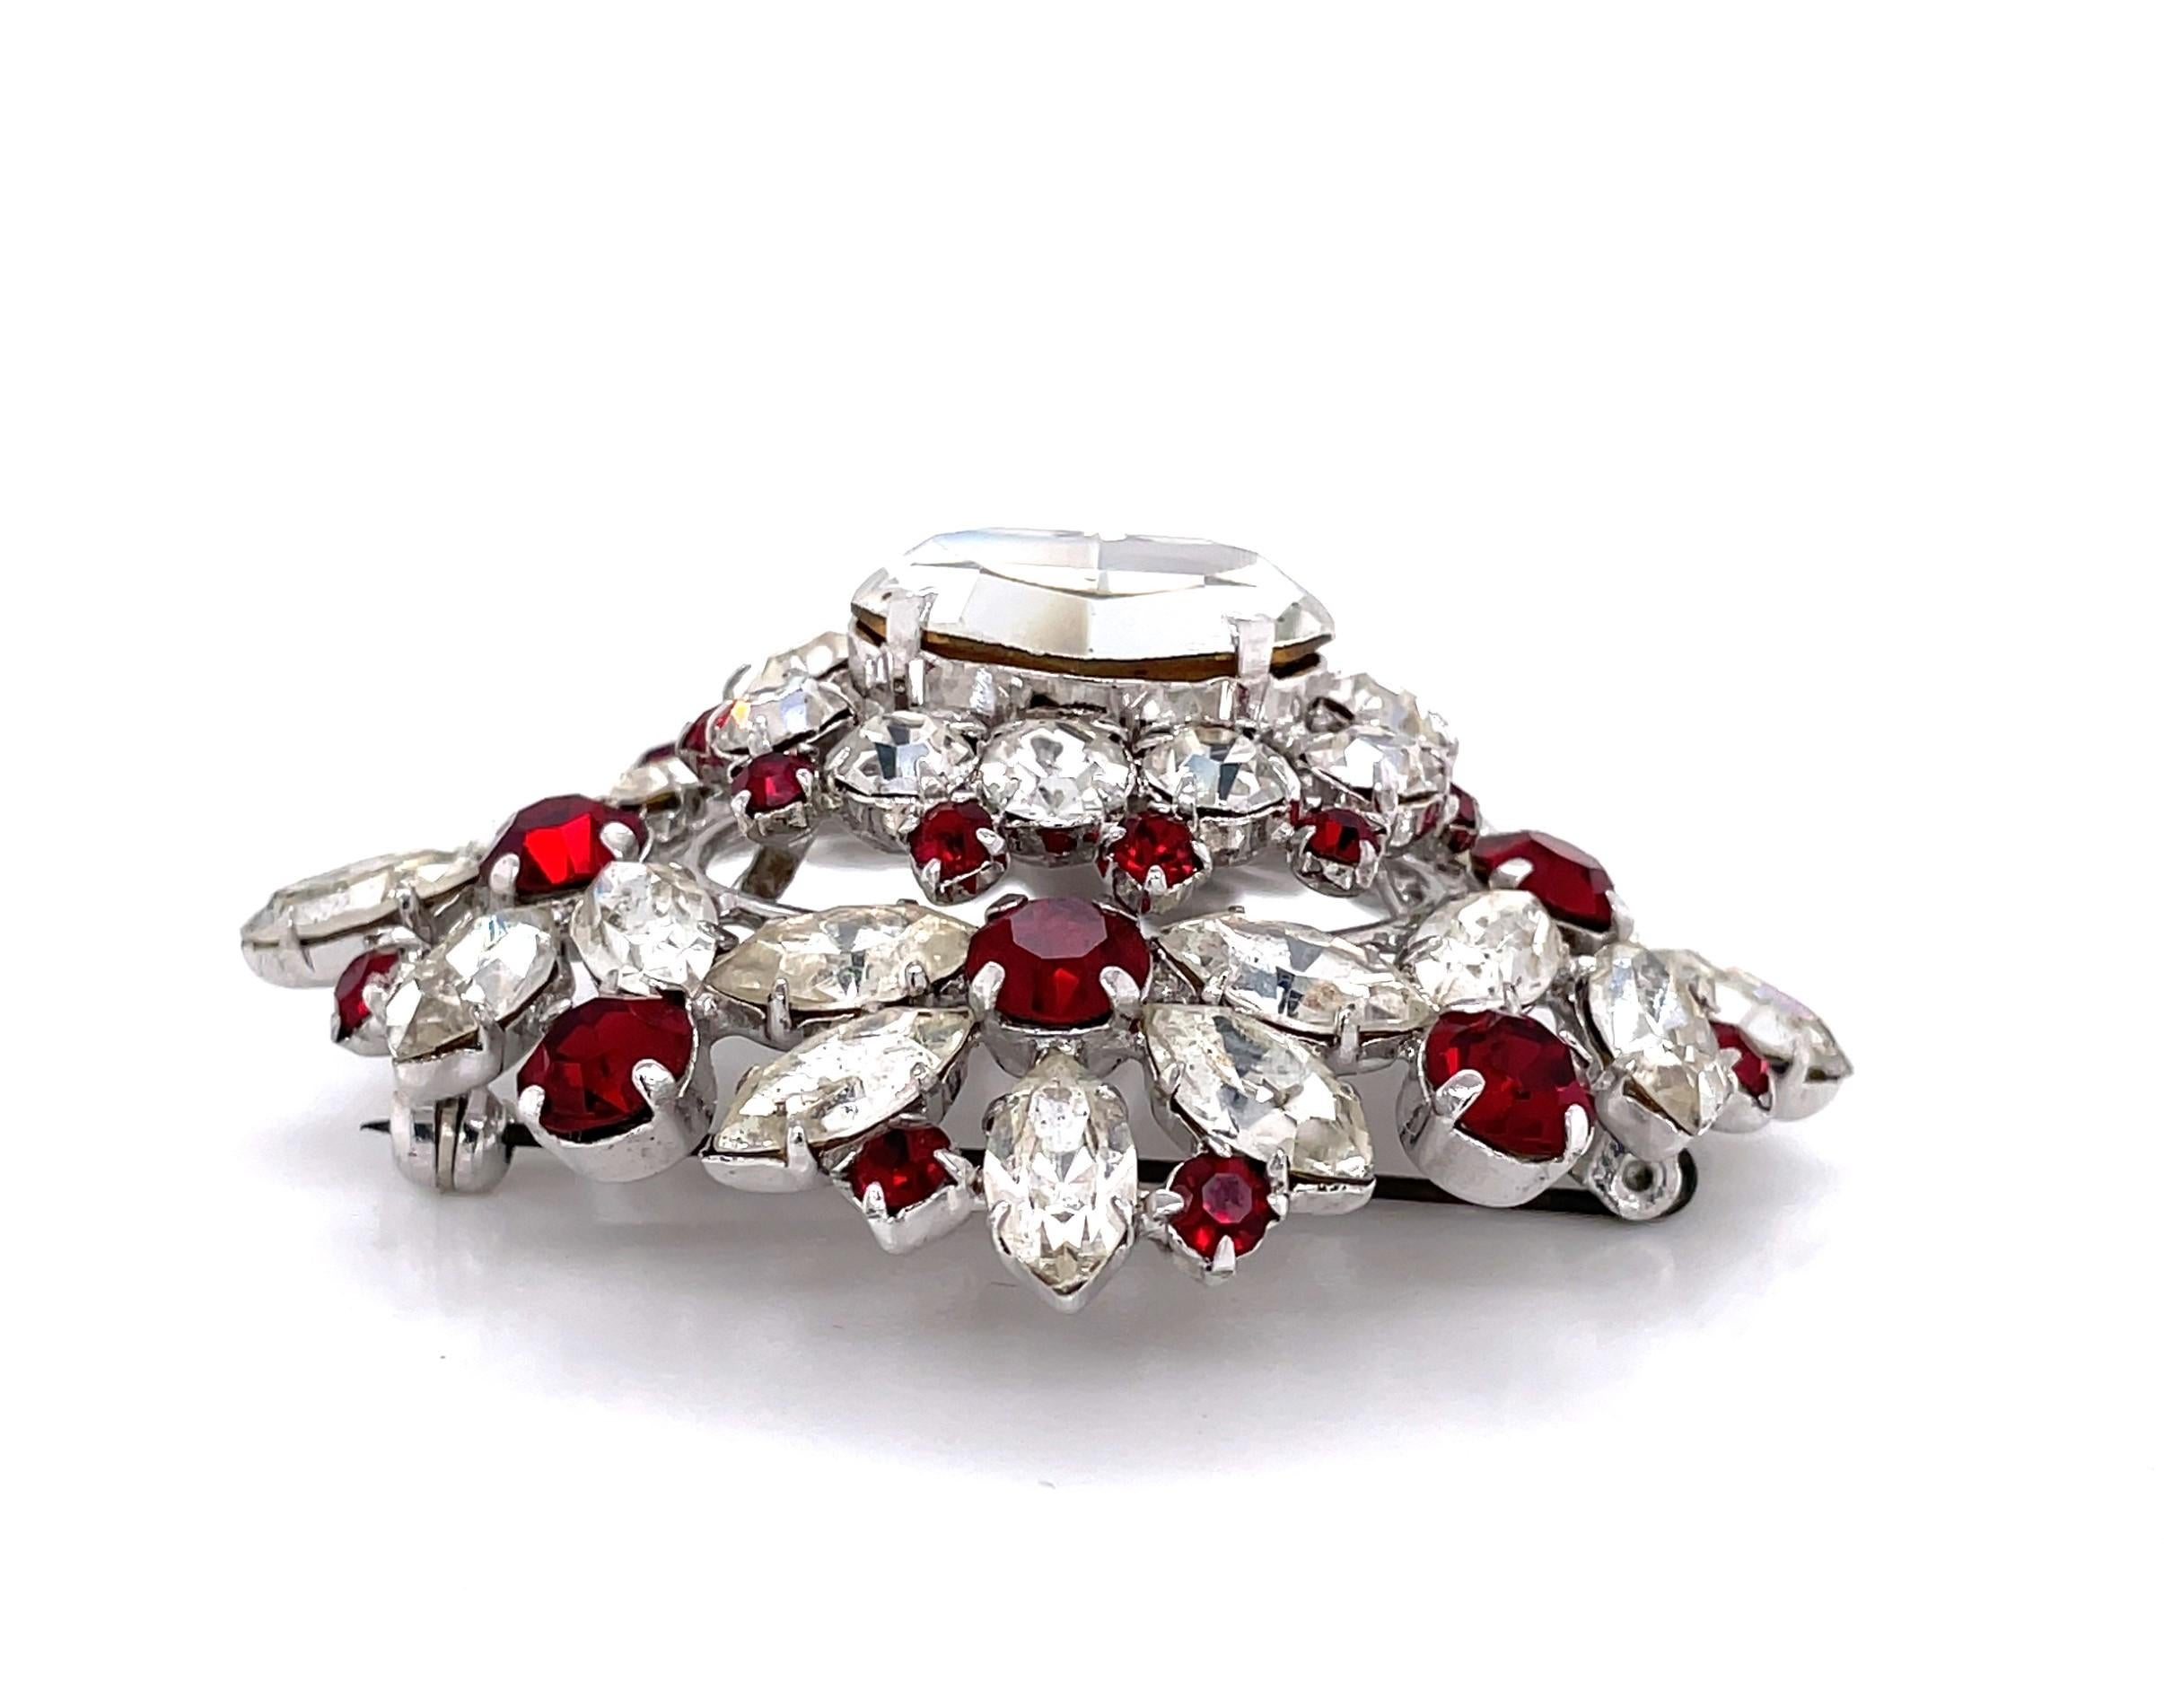 1950's Austrian Rhinestone Collectable Brooch In Good Condition For Sale In Mount Kisco, NY